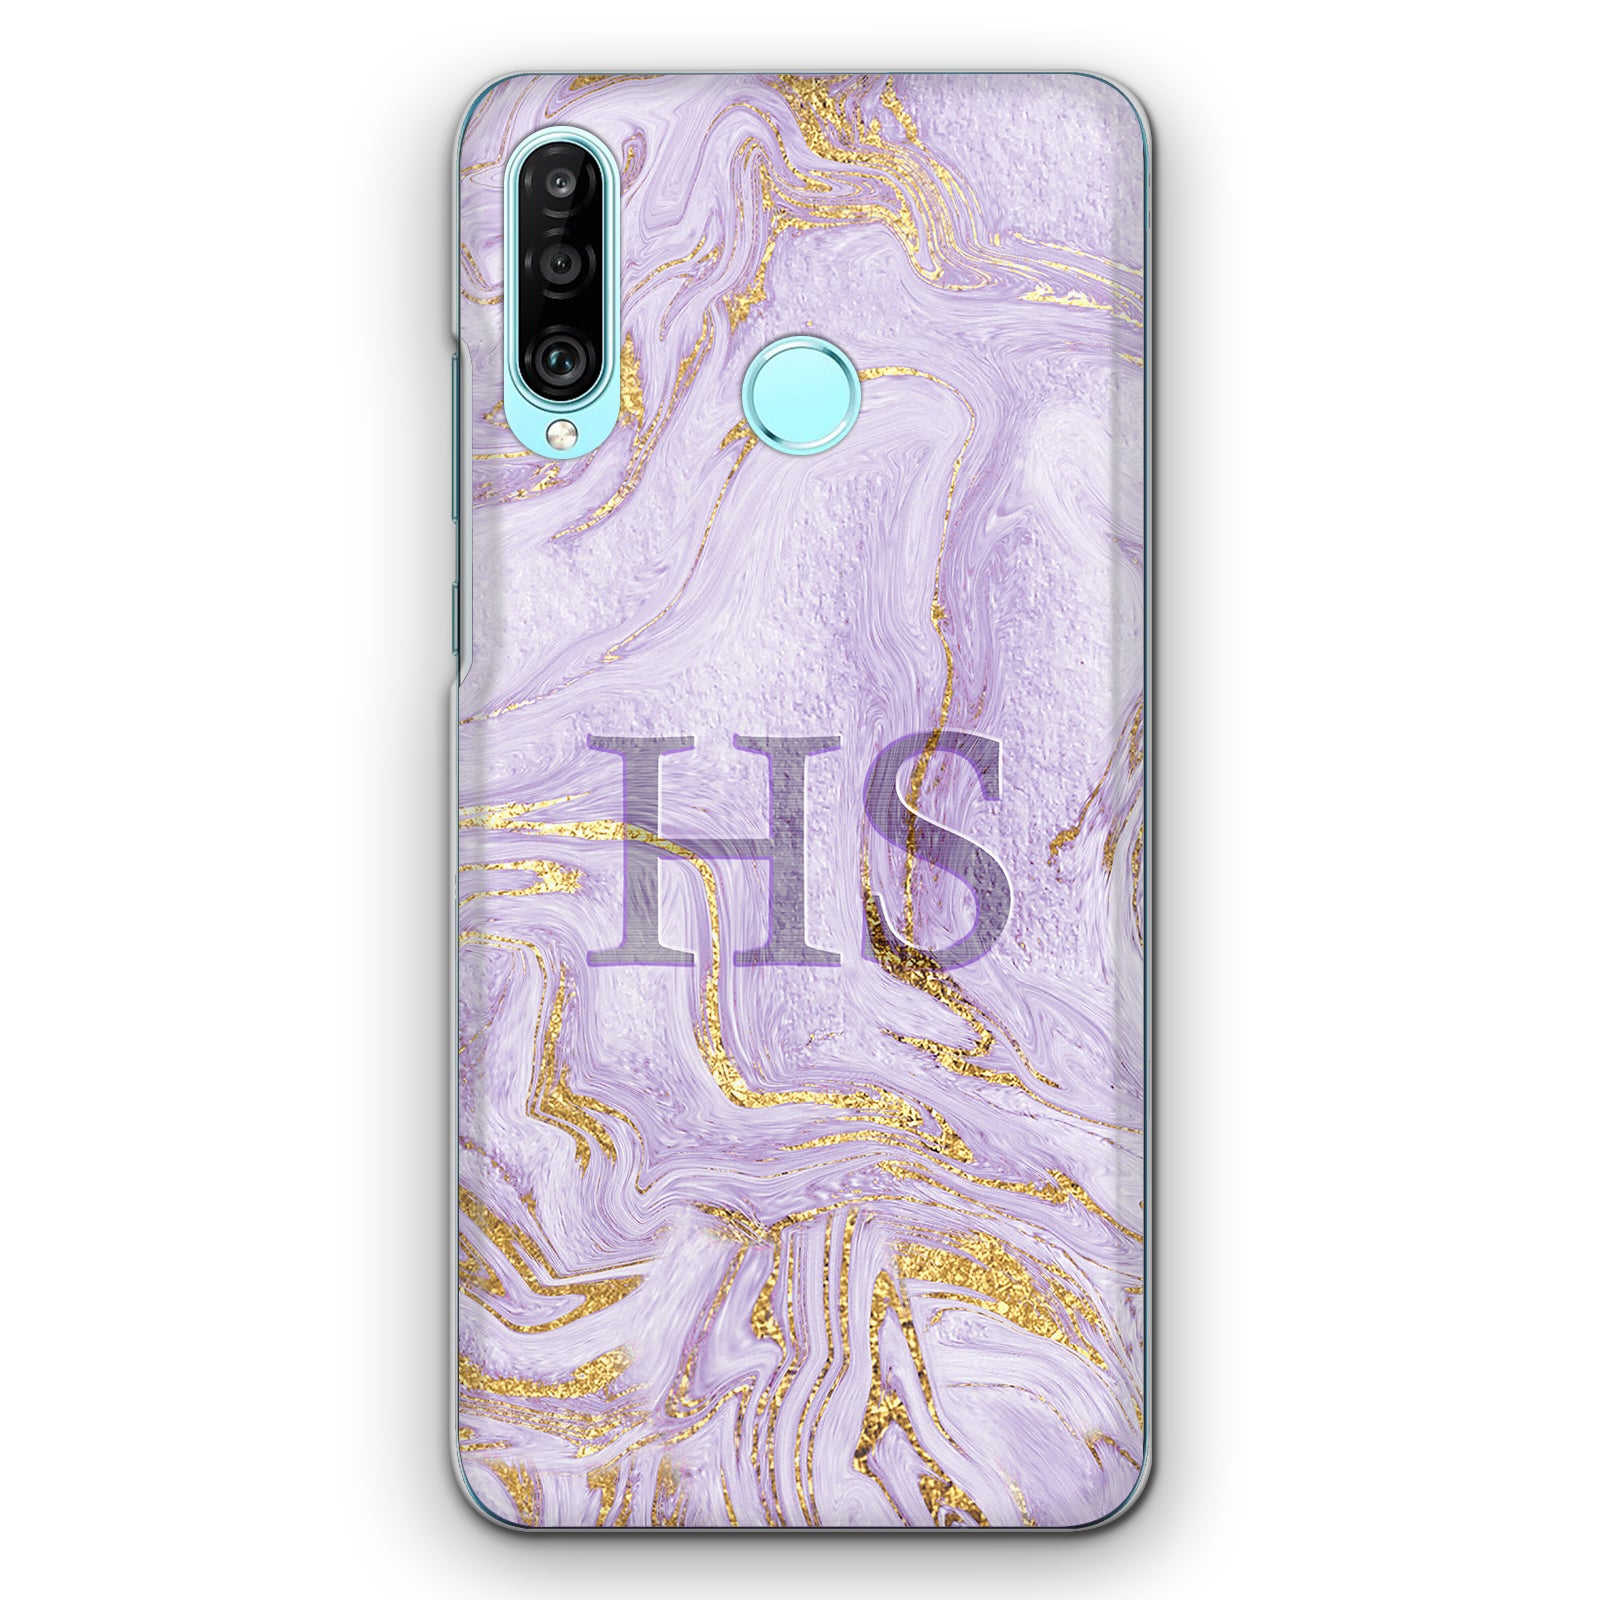 Personalised Oppo Phone Hard Case with Soft Block Initials on Lilac and Gold Marble